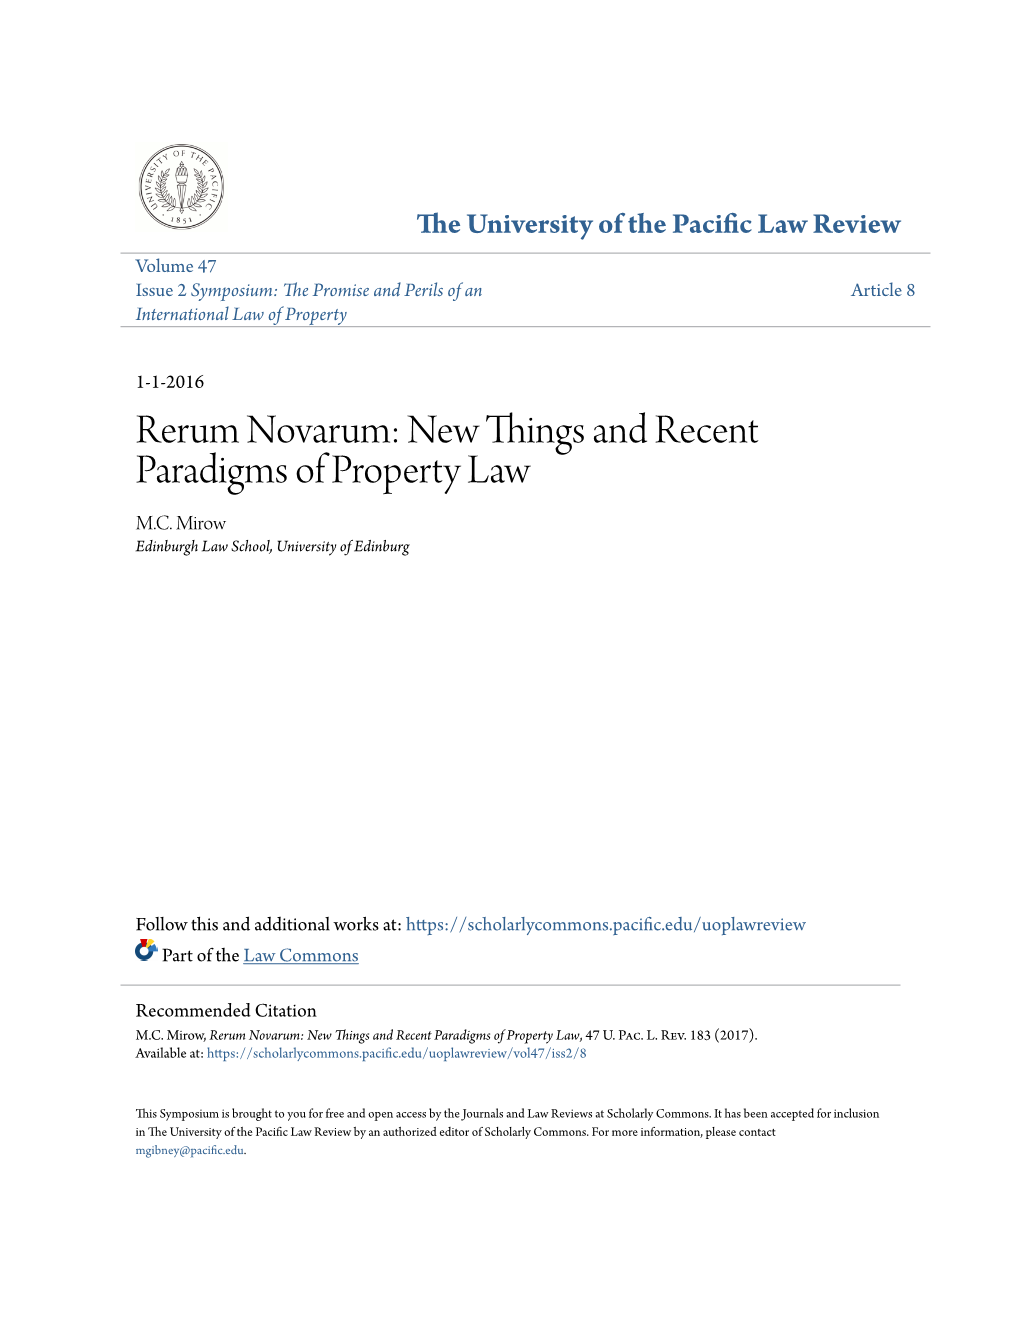 Rerum Novarum: New Things and Recent Paradigms of Property Law M.C